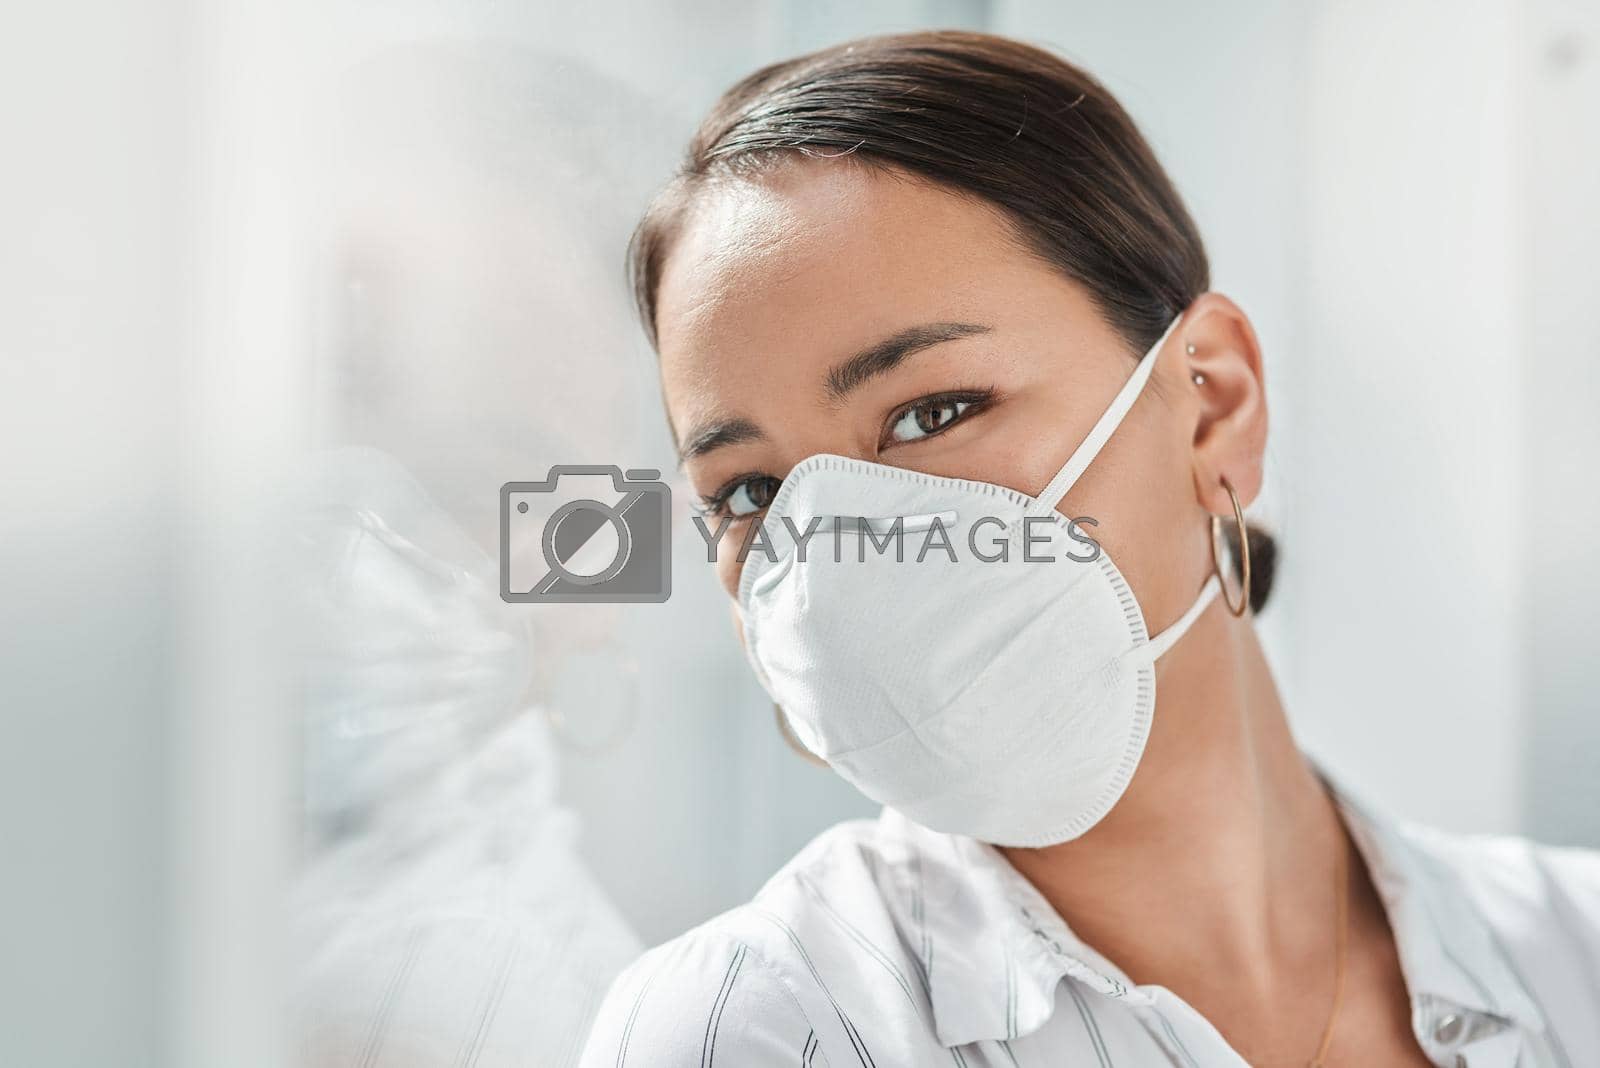 Royalty free image of 2020 The year of the face mask. Shot of a masked young businesswoman leaning against a window in a modern office. by YuriArcurs